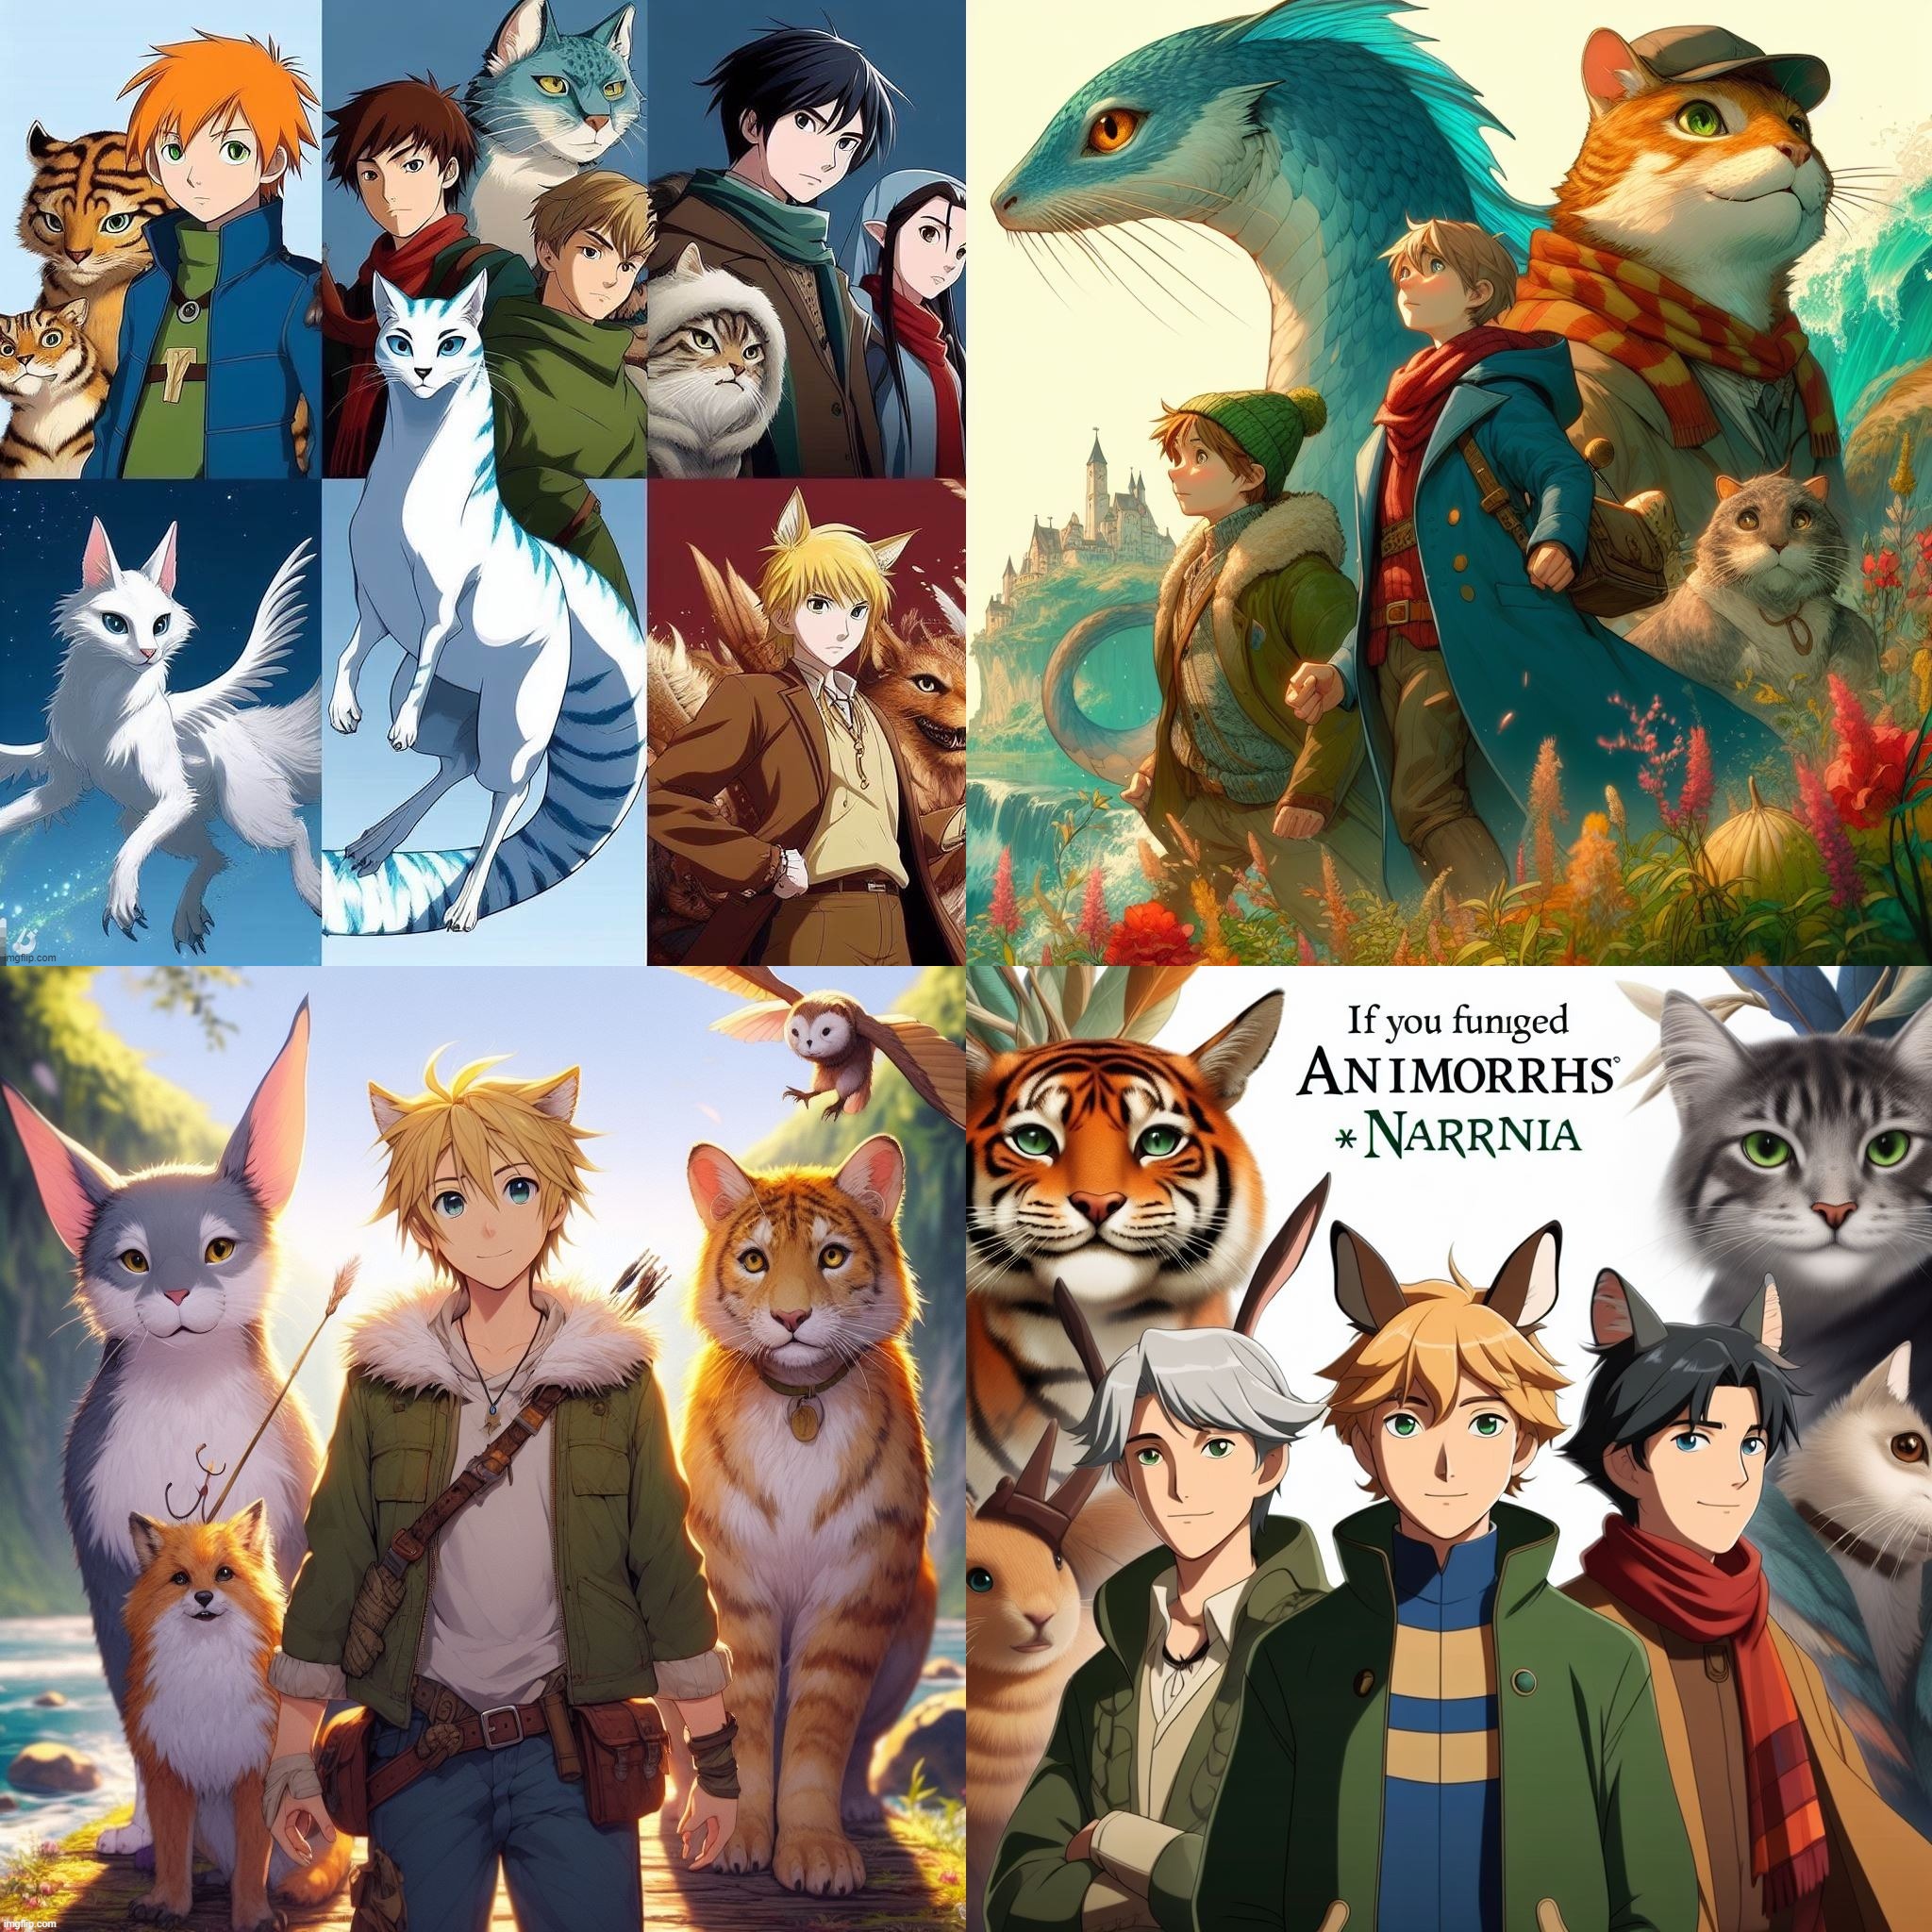 AI Bing: If you fused Animorphs, Redwall, and Narnia into an Anime. | image tagged in ai generated,animorphs,narnia,redwall,anime,fusion | made w/ Imgflip meme maker